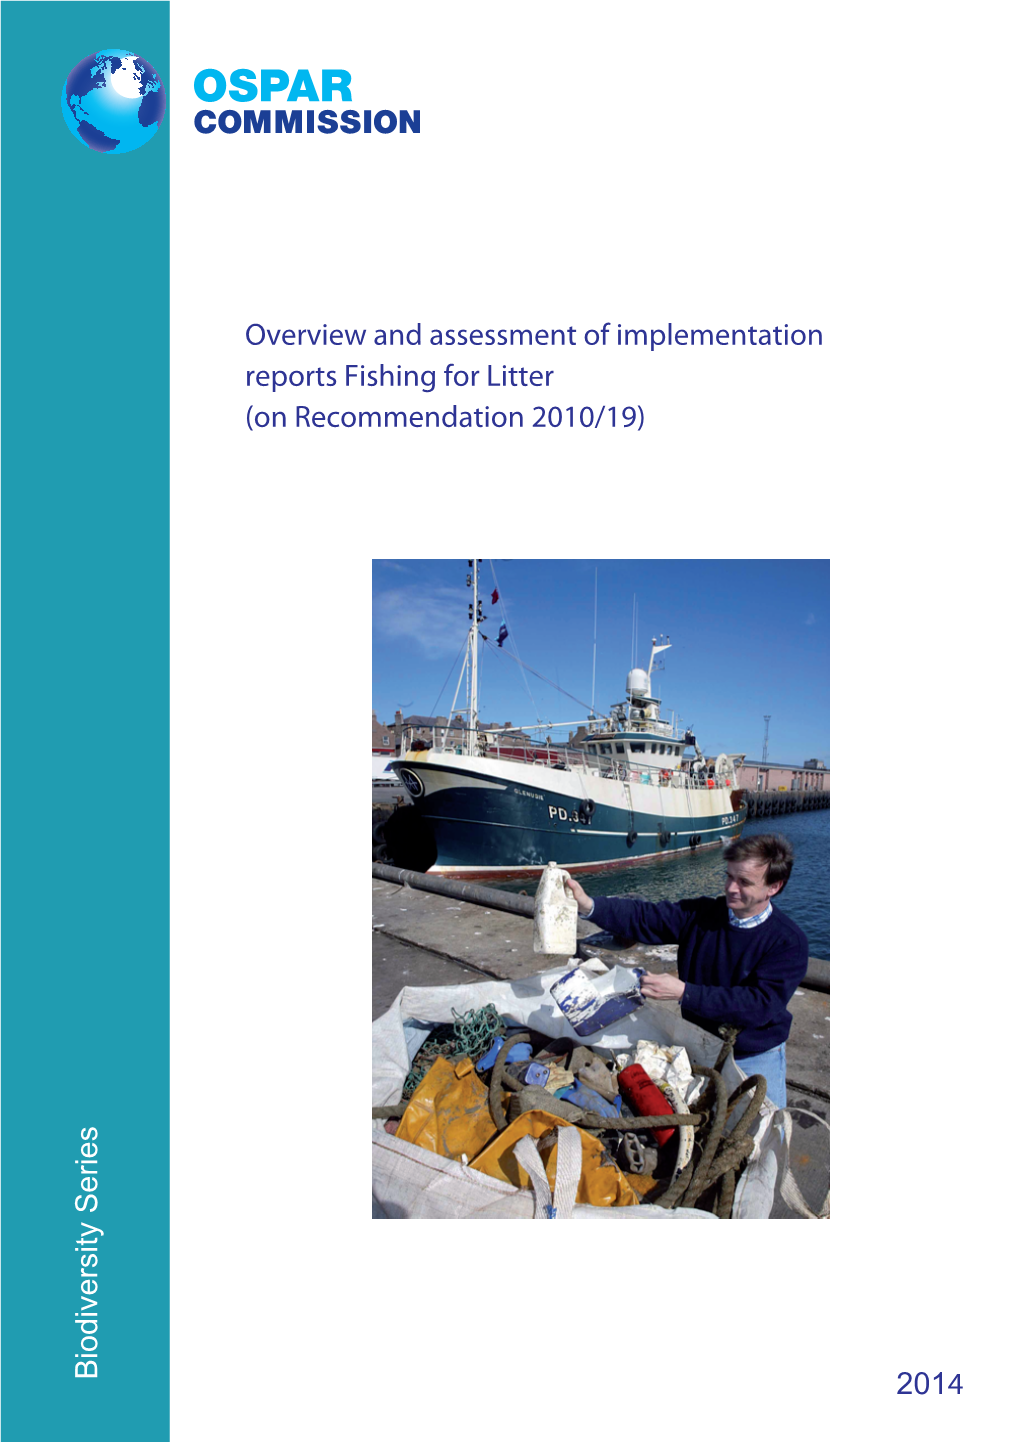 2014 Overview and Assessment of Implementation Reports Fishing for Litter